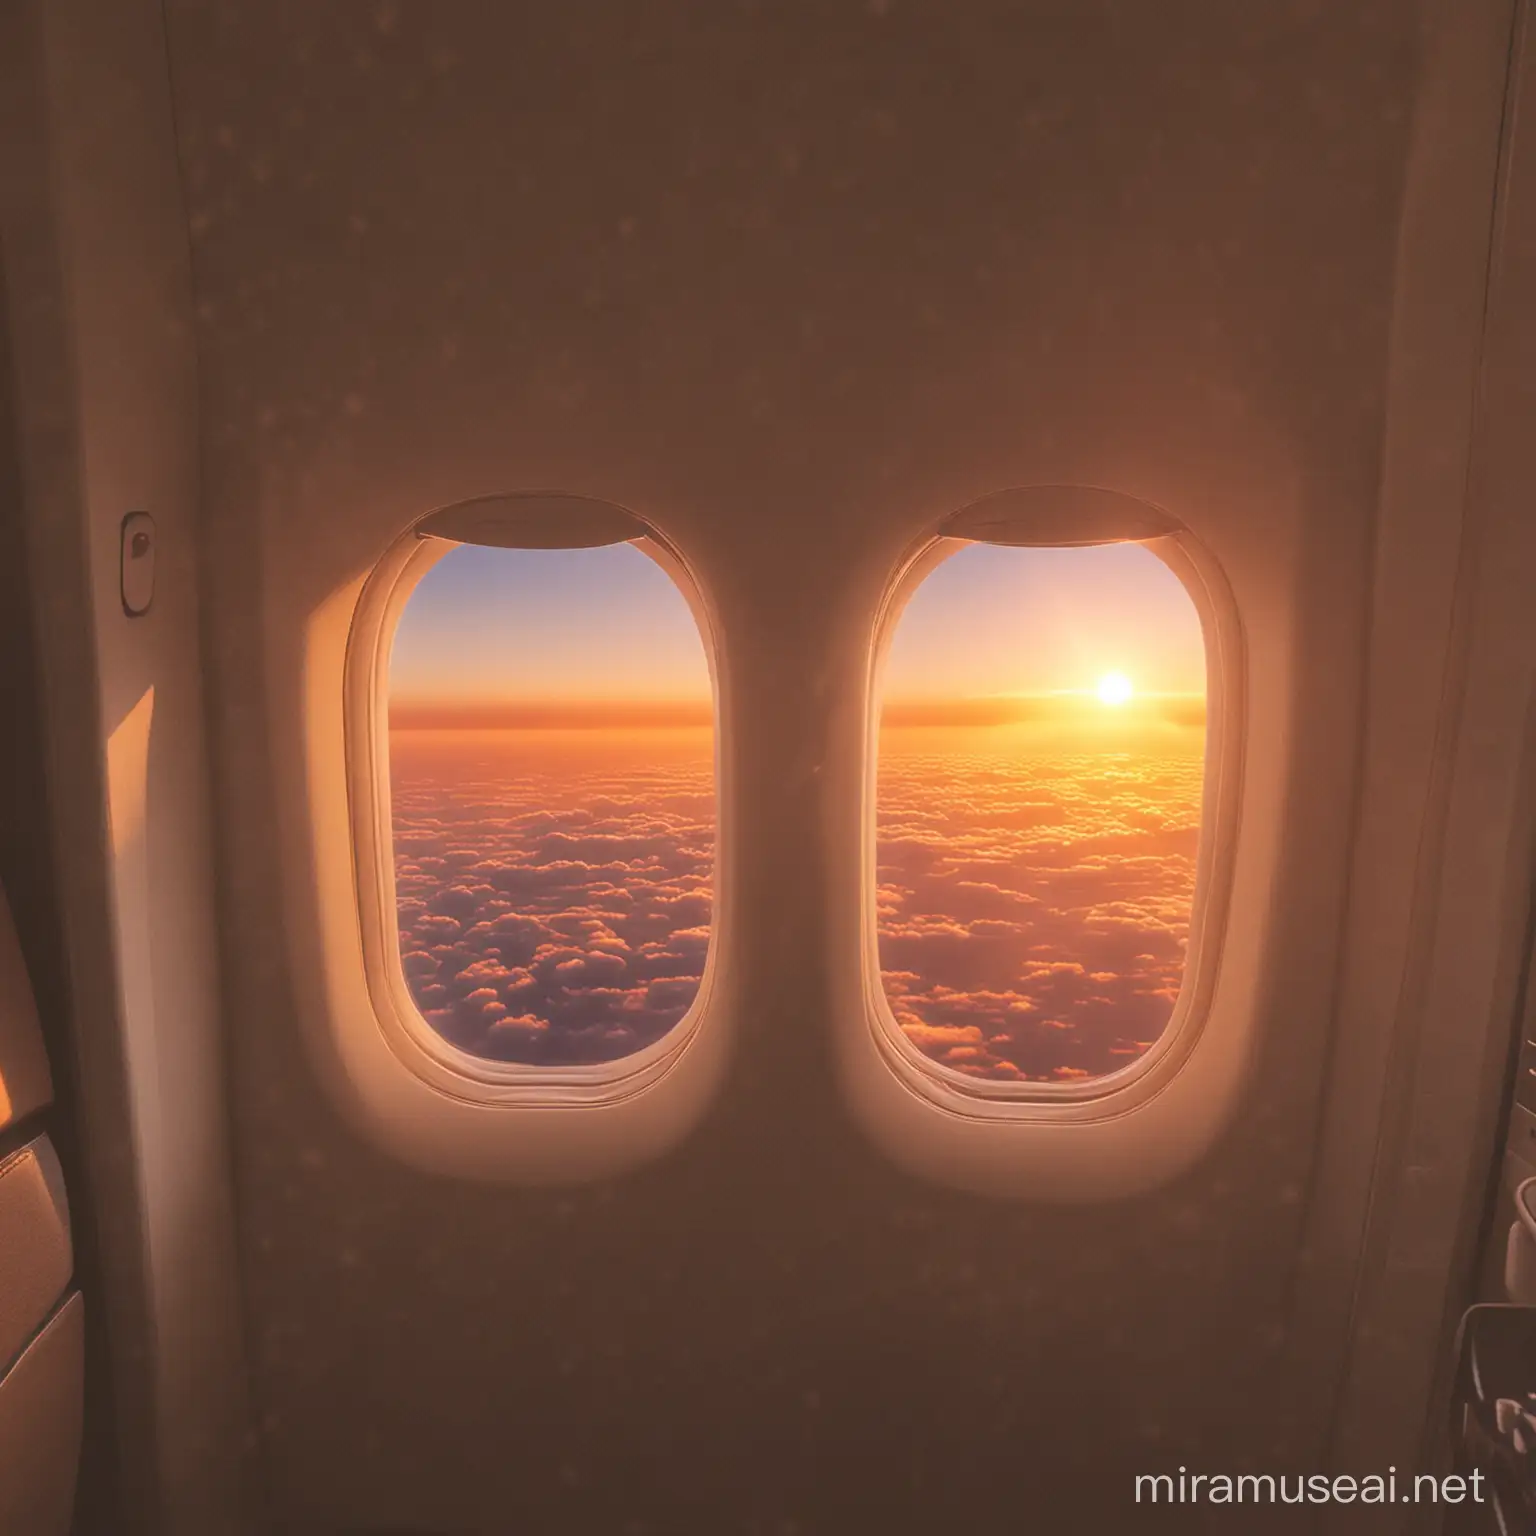 make a scene for inside airplane with the window and lighting features which is synced with outside (sunset) and 1 light is close with the window itself to show obviously this light is synced with outside sunset. 